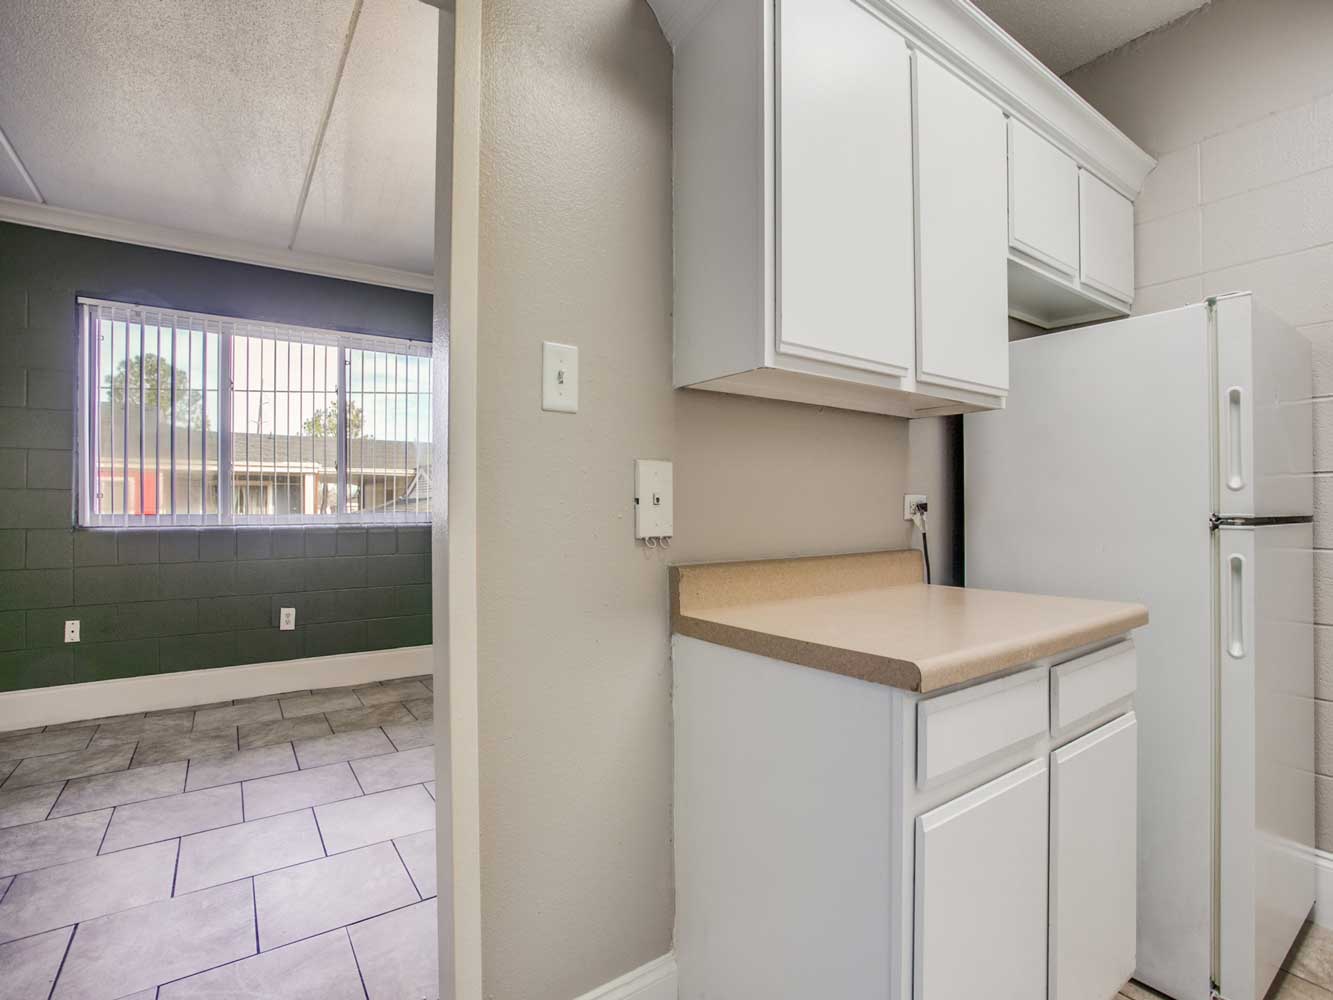 Kitchen Leading Into Living Area at Villas on Sixty Fifth Apartments in Little Rock, Arkansas